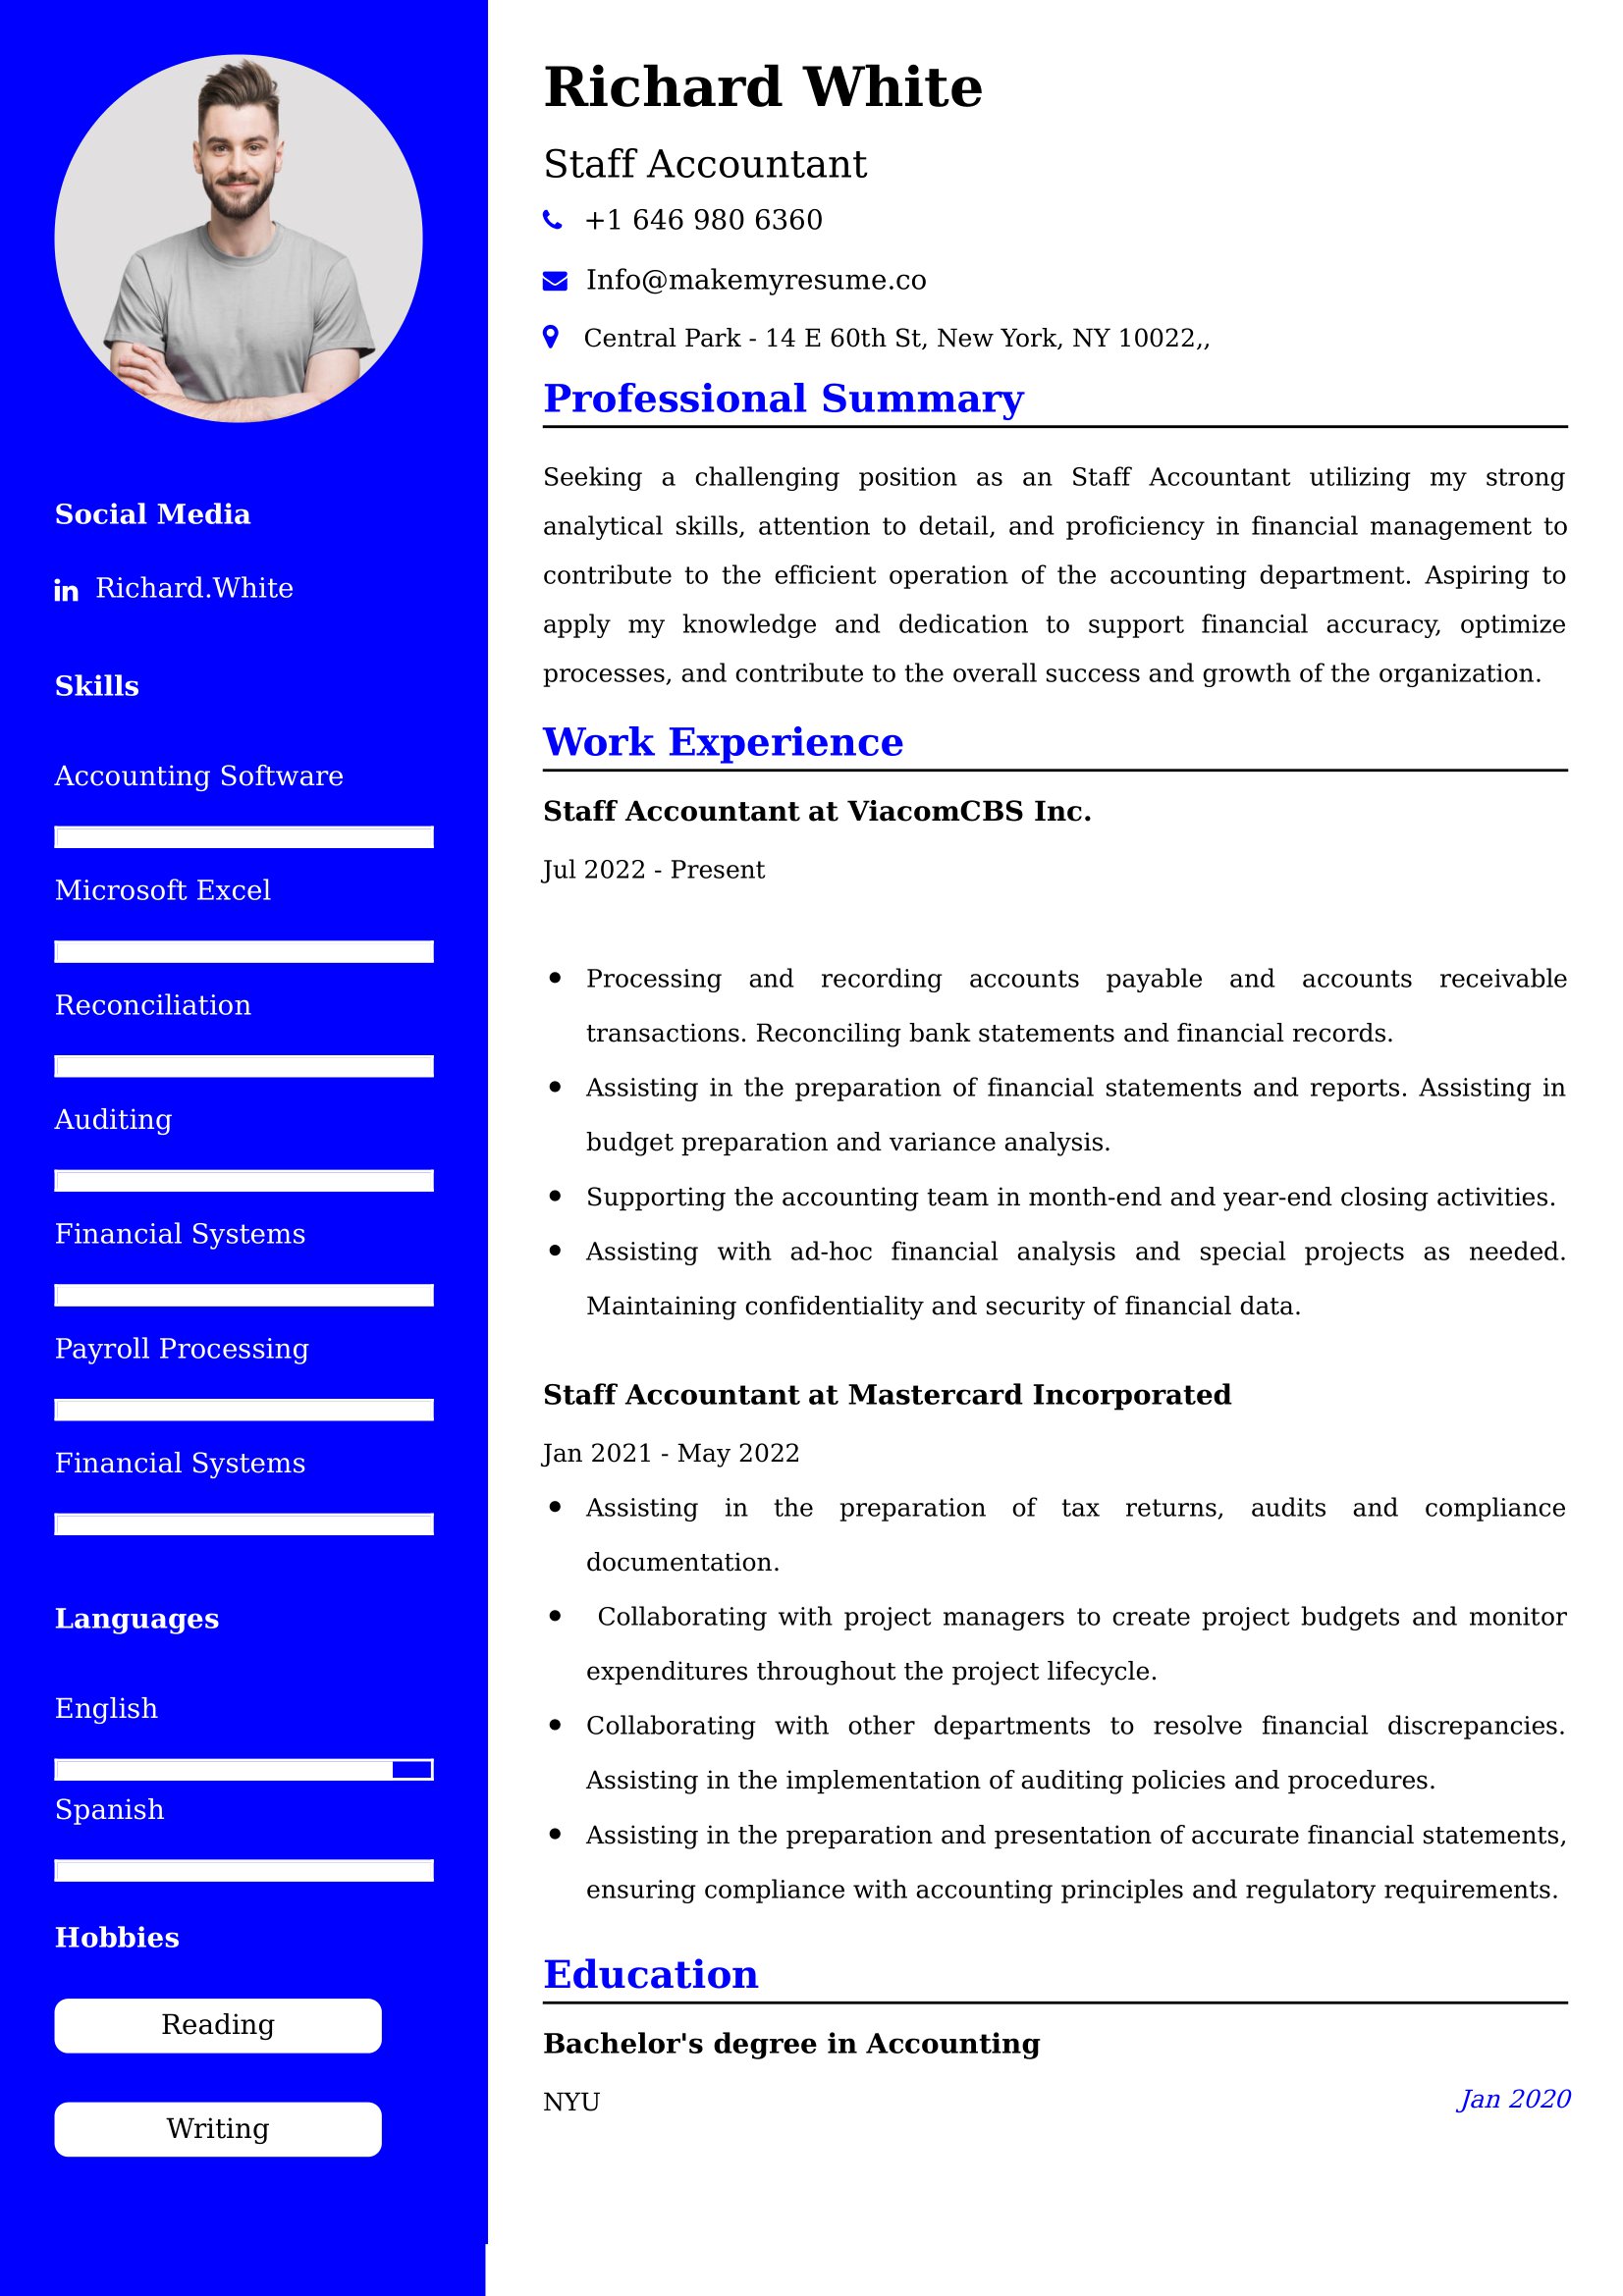 Staff Accountant Resume Examples - Australian Format and Tips